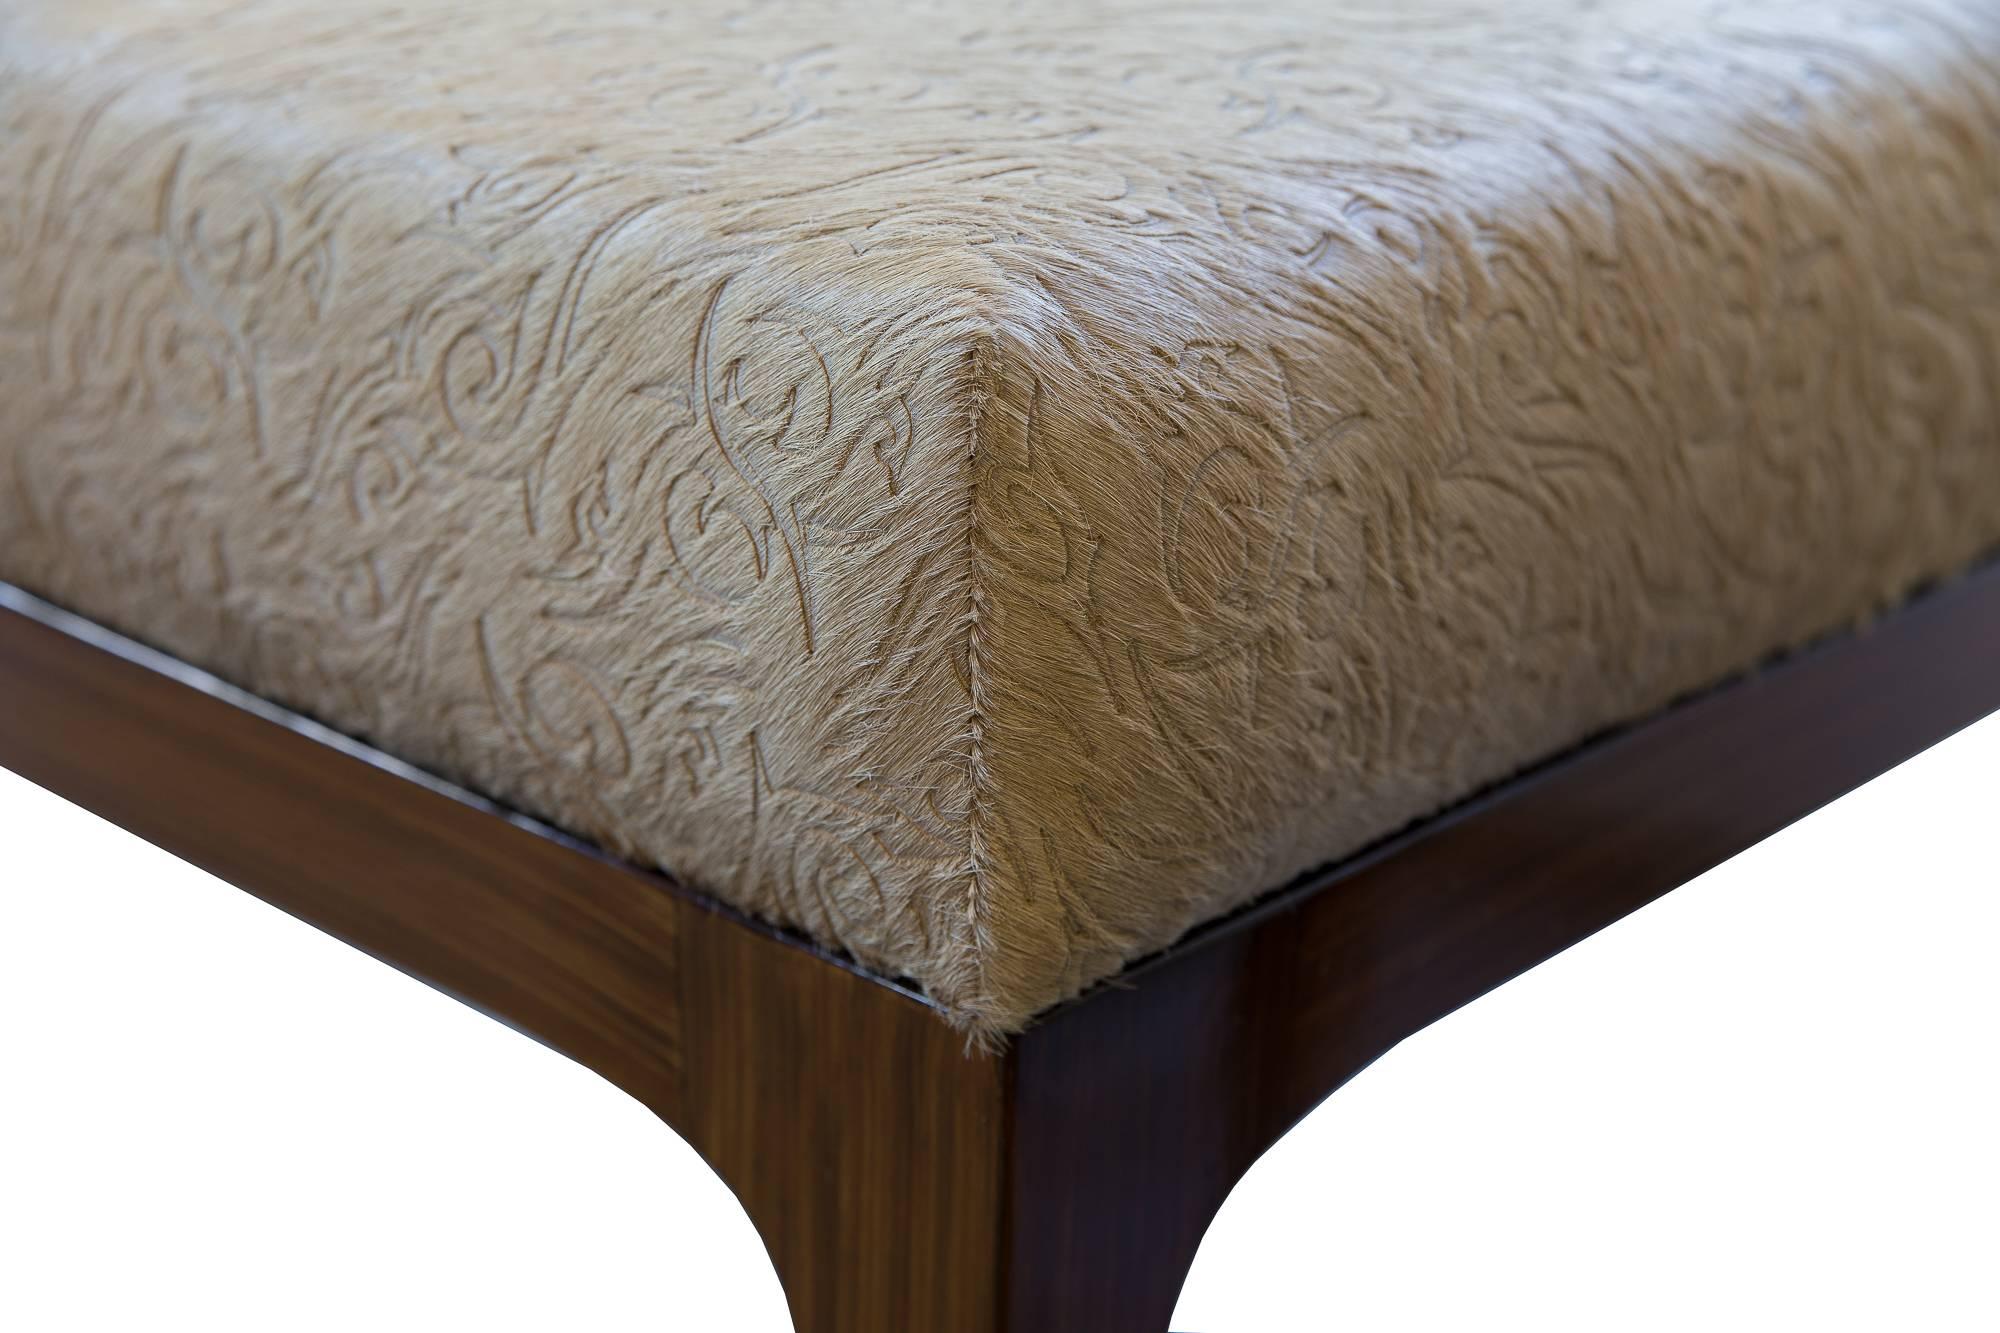 The Raphael Ottomans by KLASP home

Mid-Century Modern style laser cut floral pattern cowhide ottomans, sold as a pair.

Laser cut floral pattern cowhide in caramel
Sold as a pair 
Normandy cowhide
Mid-Century Modern frame
90 shine
Dark